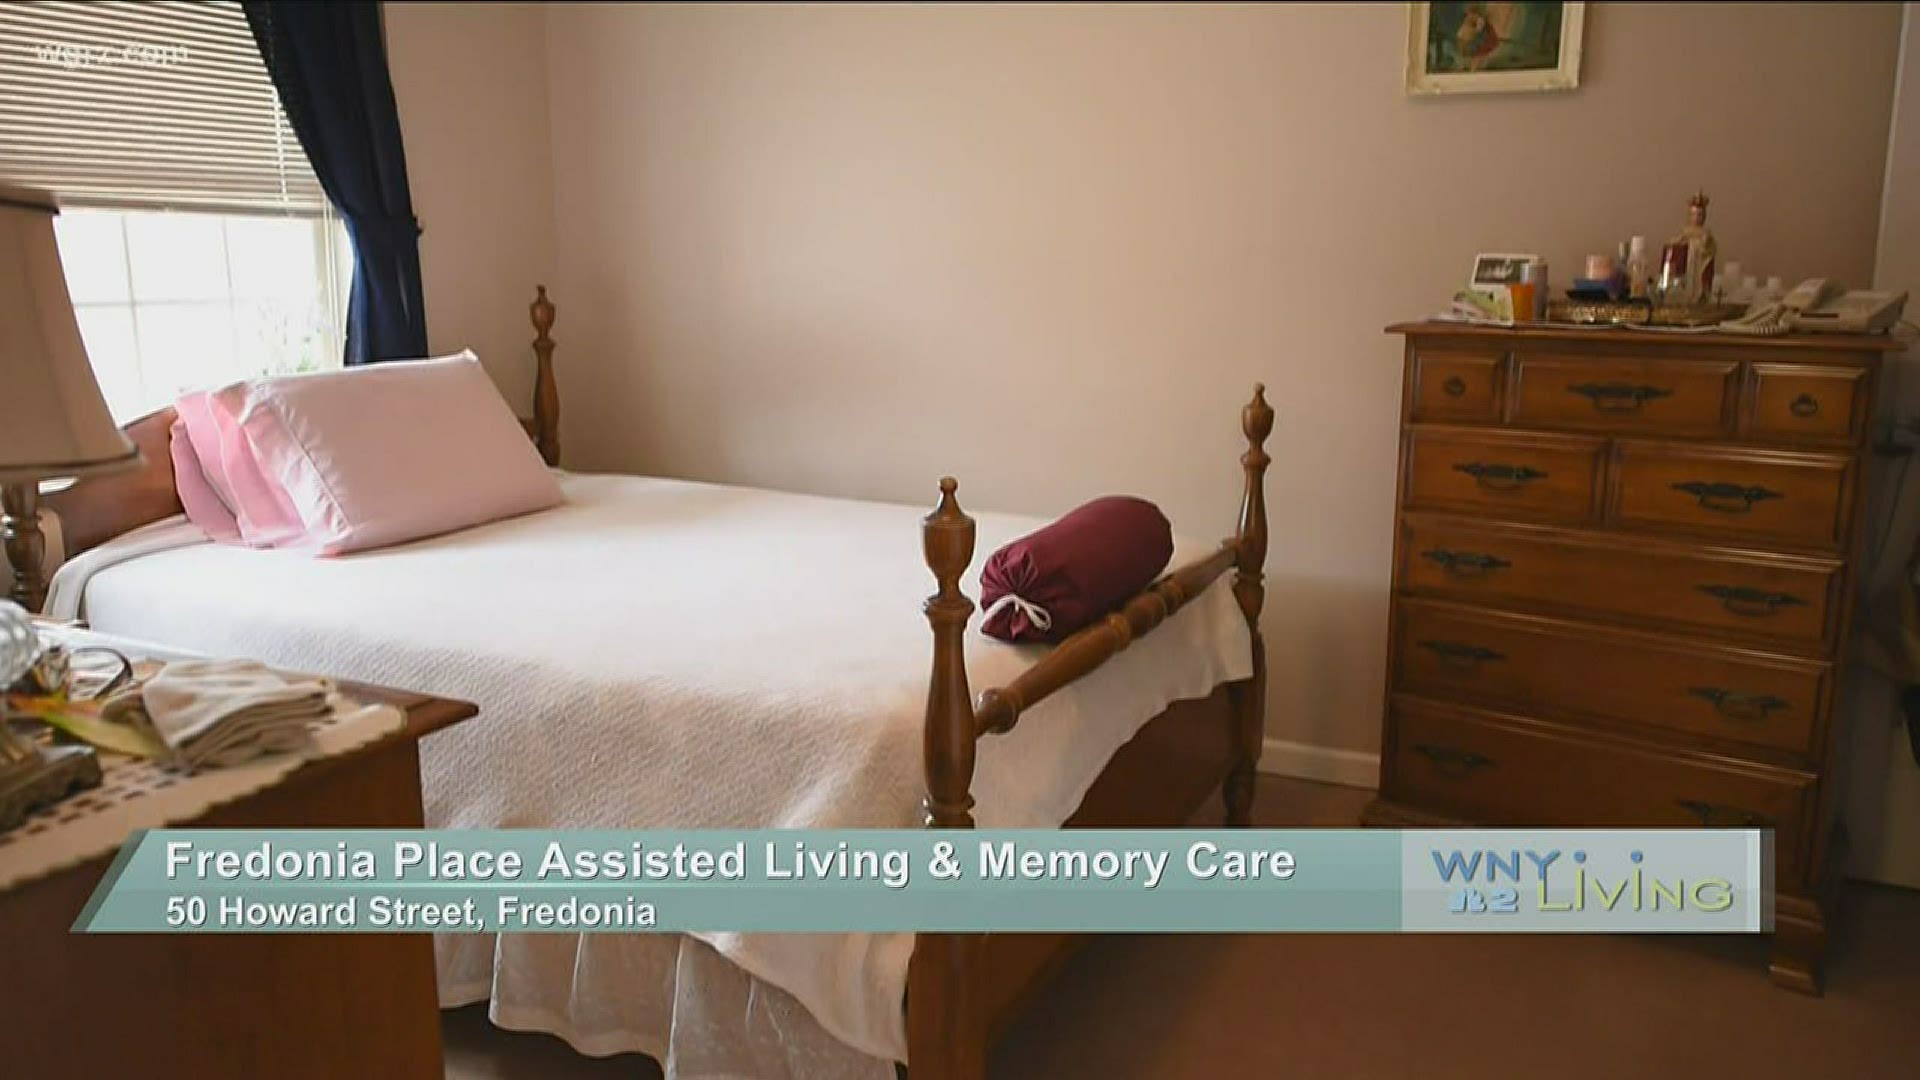 July 25 - Fredonia Place Assisted Living & Memory Care (THIS VIDEO IS SPONSORED BY FREDONIA PLACE ASSISTED LIVING & MEMORY CARE)